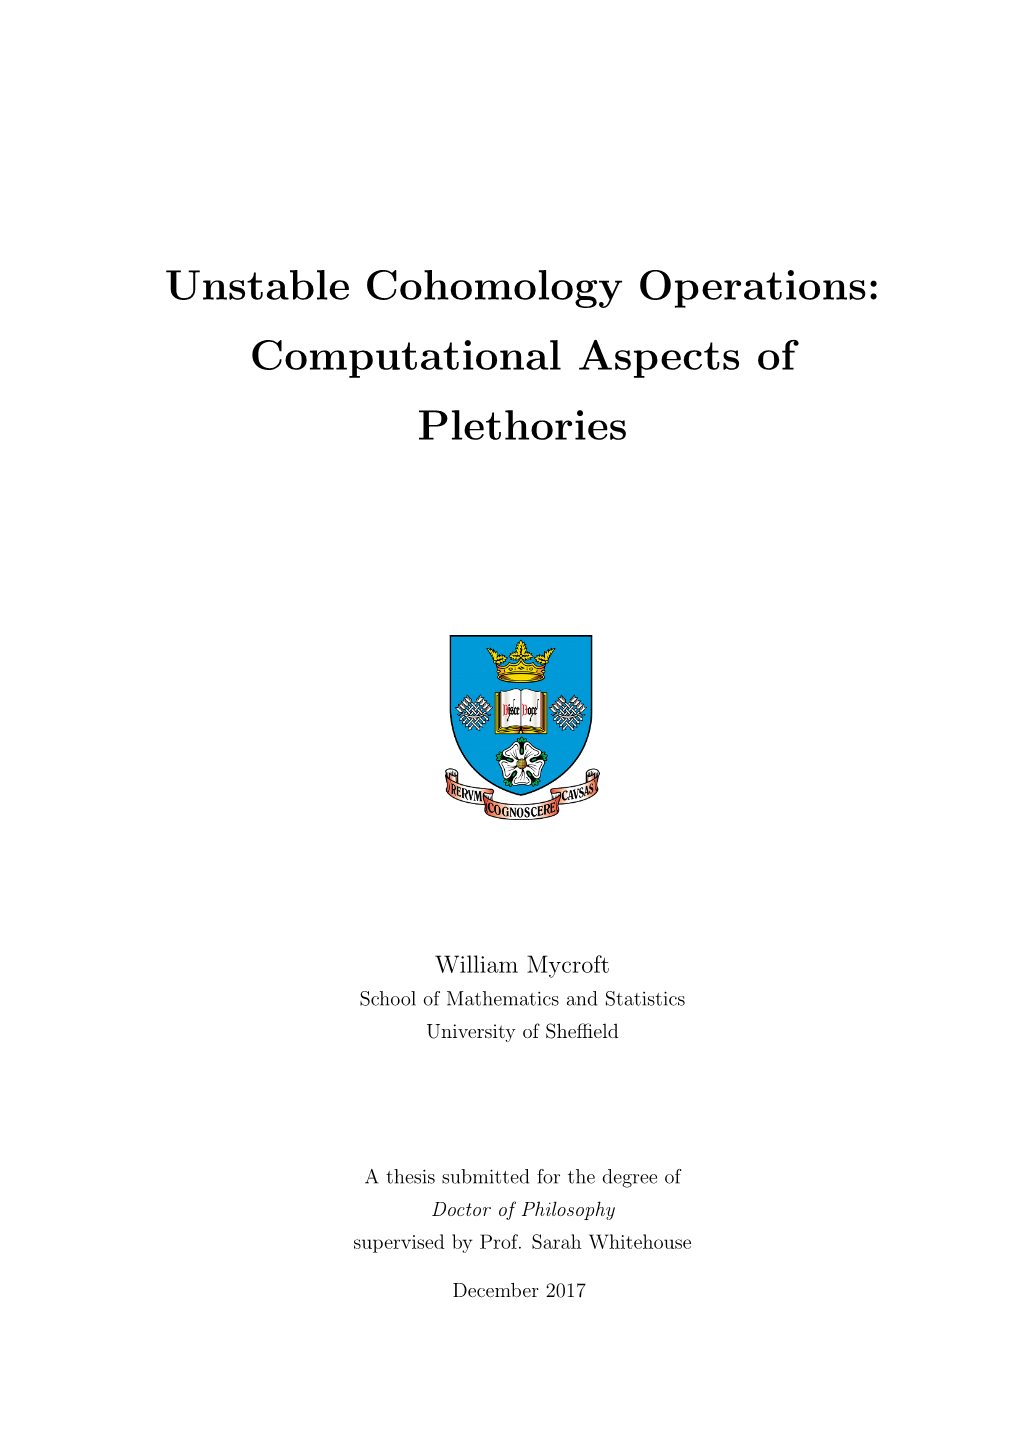 Unstable Cohomology Operations: Computational Aspects of Plethories